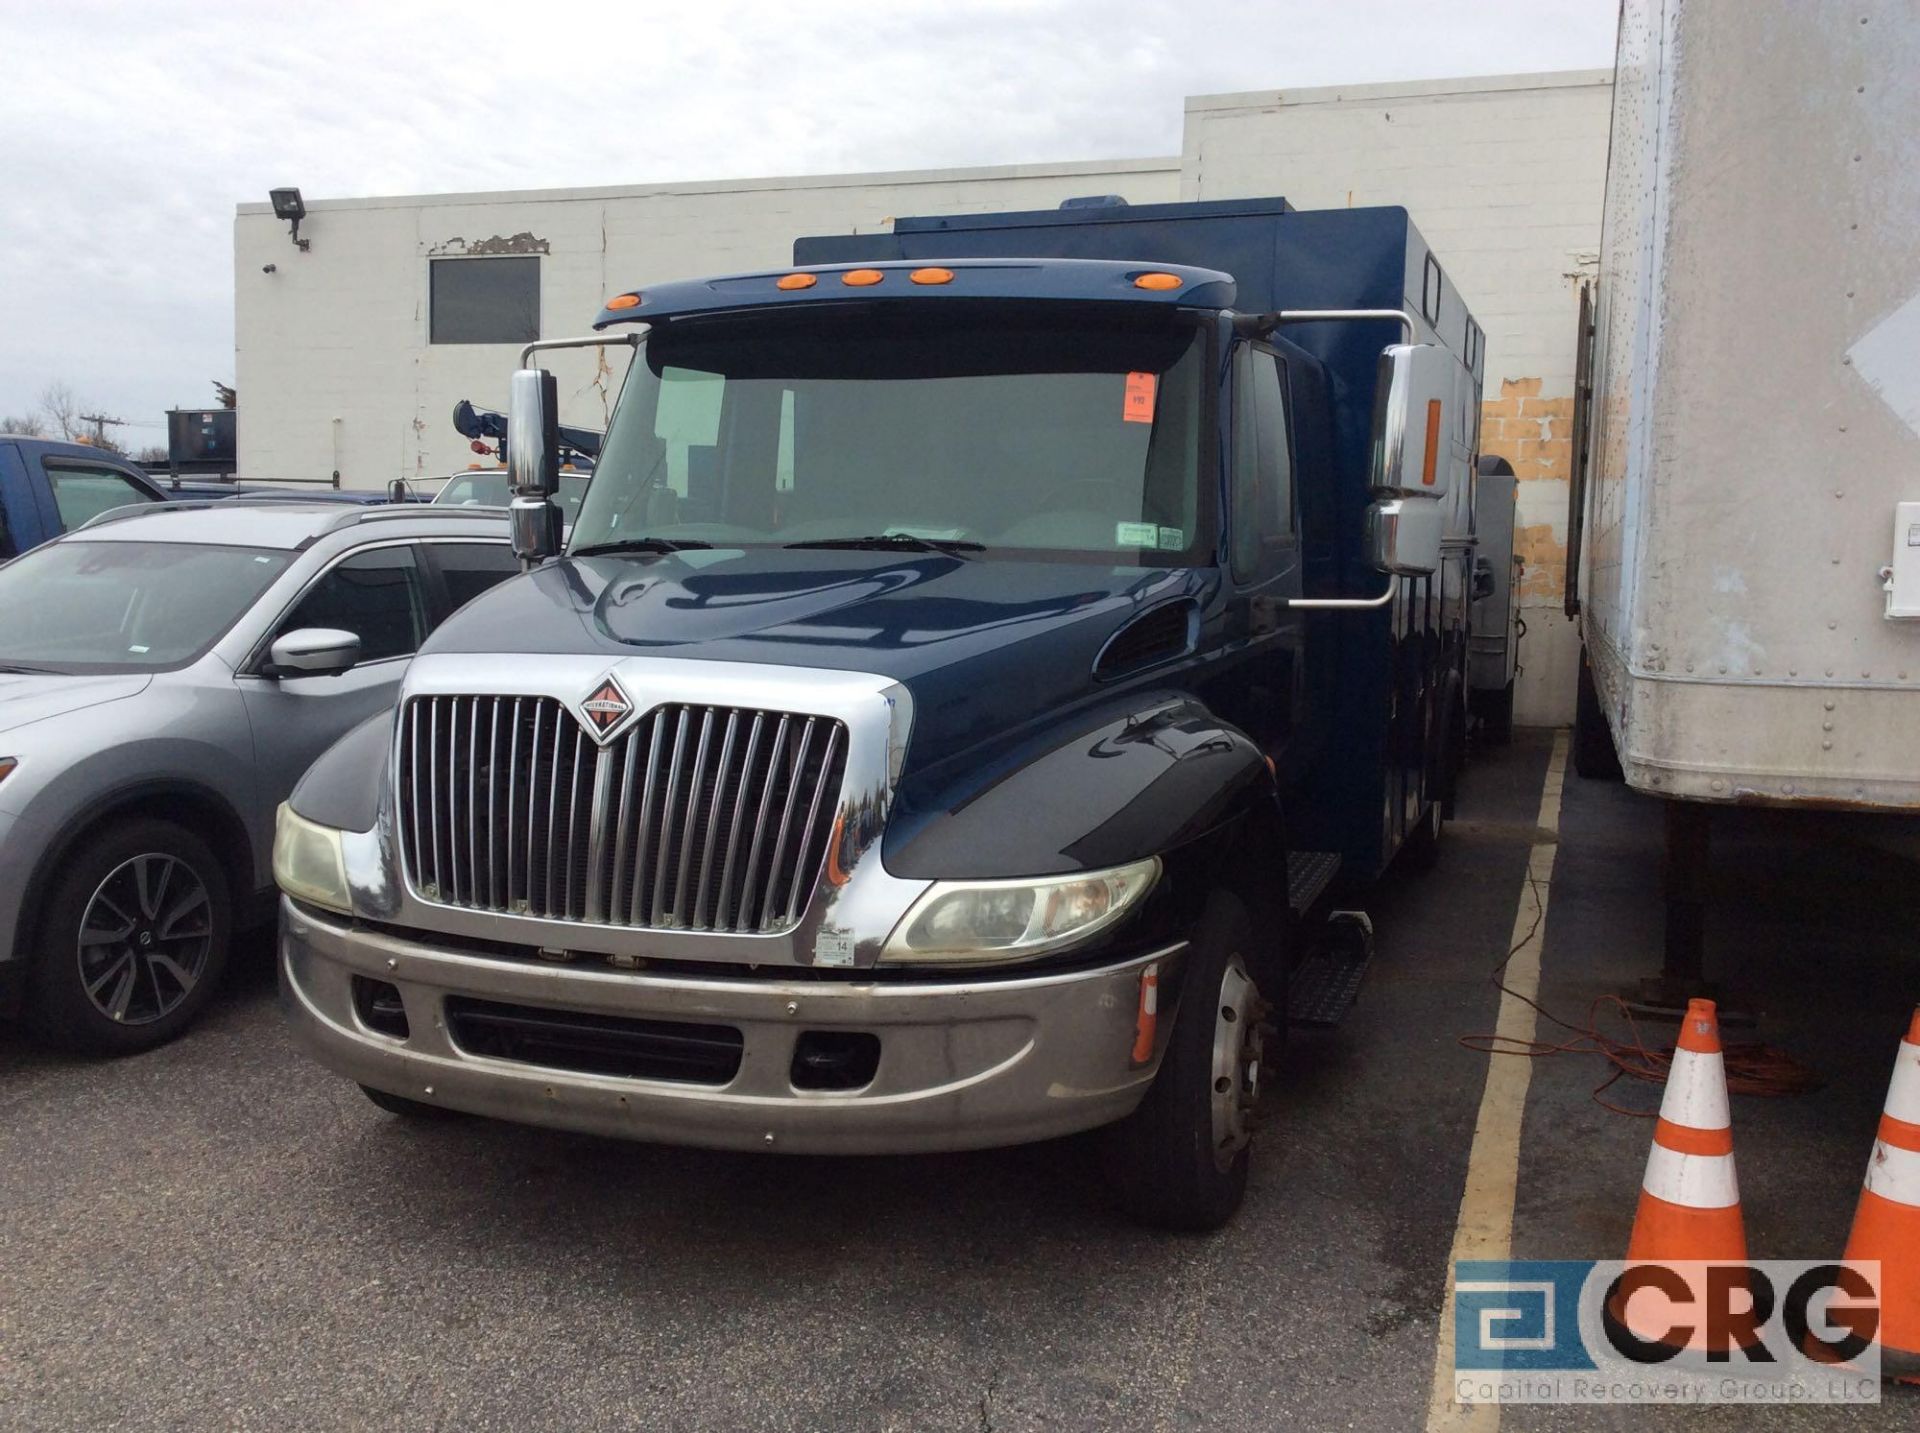 2002 International 4200 SBA 4x2 extended cab chassis with utility body, , AT, AC, vinyl interior,